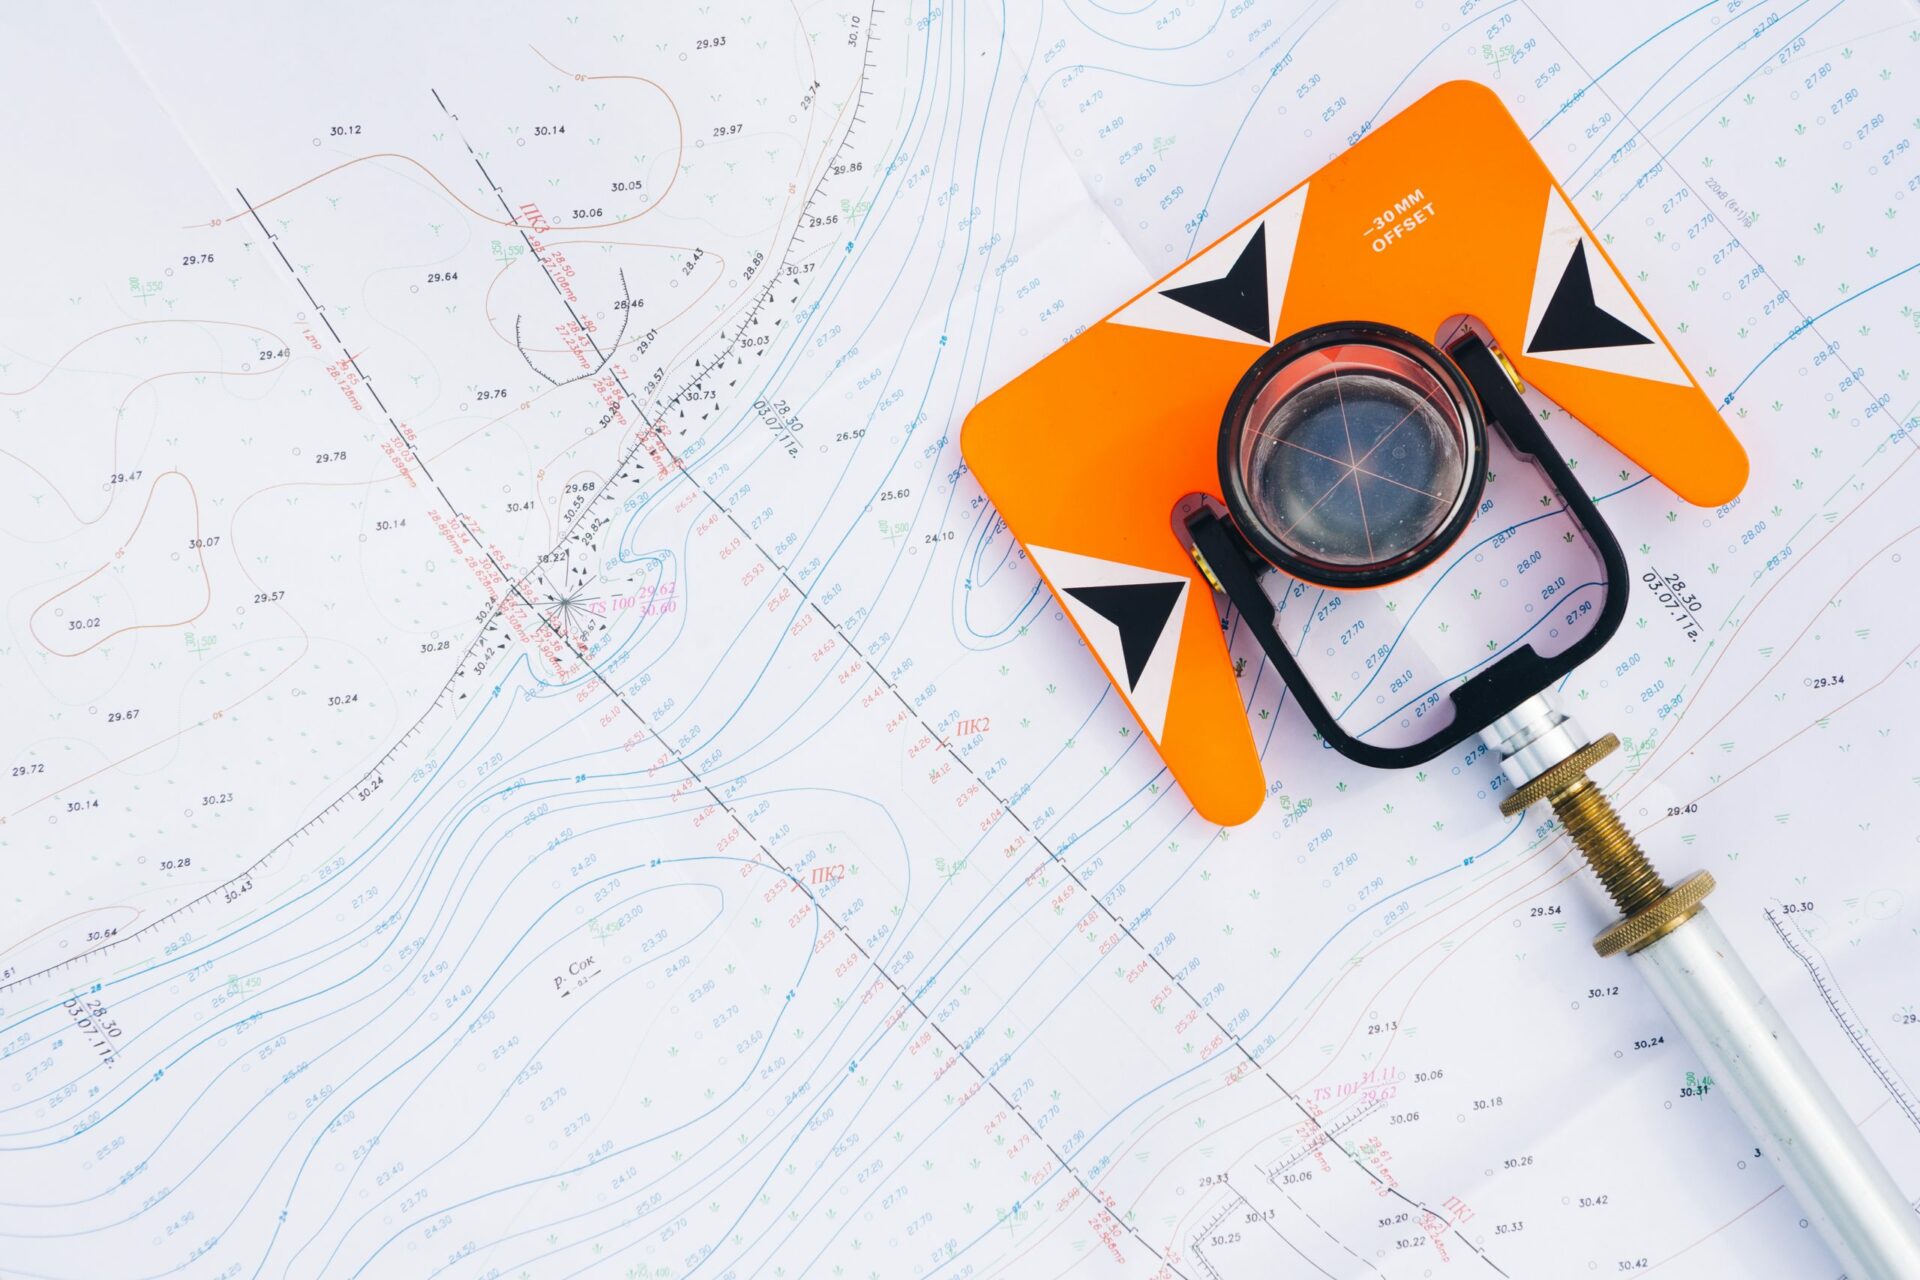 Theodolite Prism atop a map and table